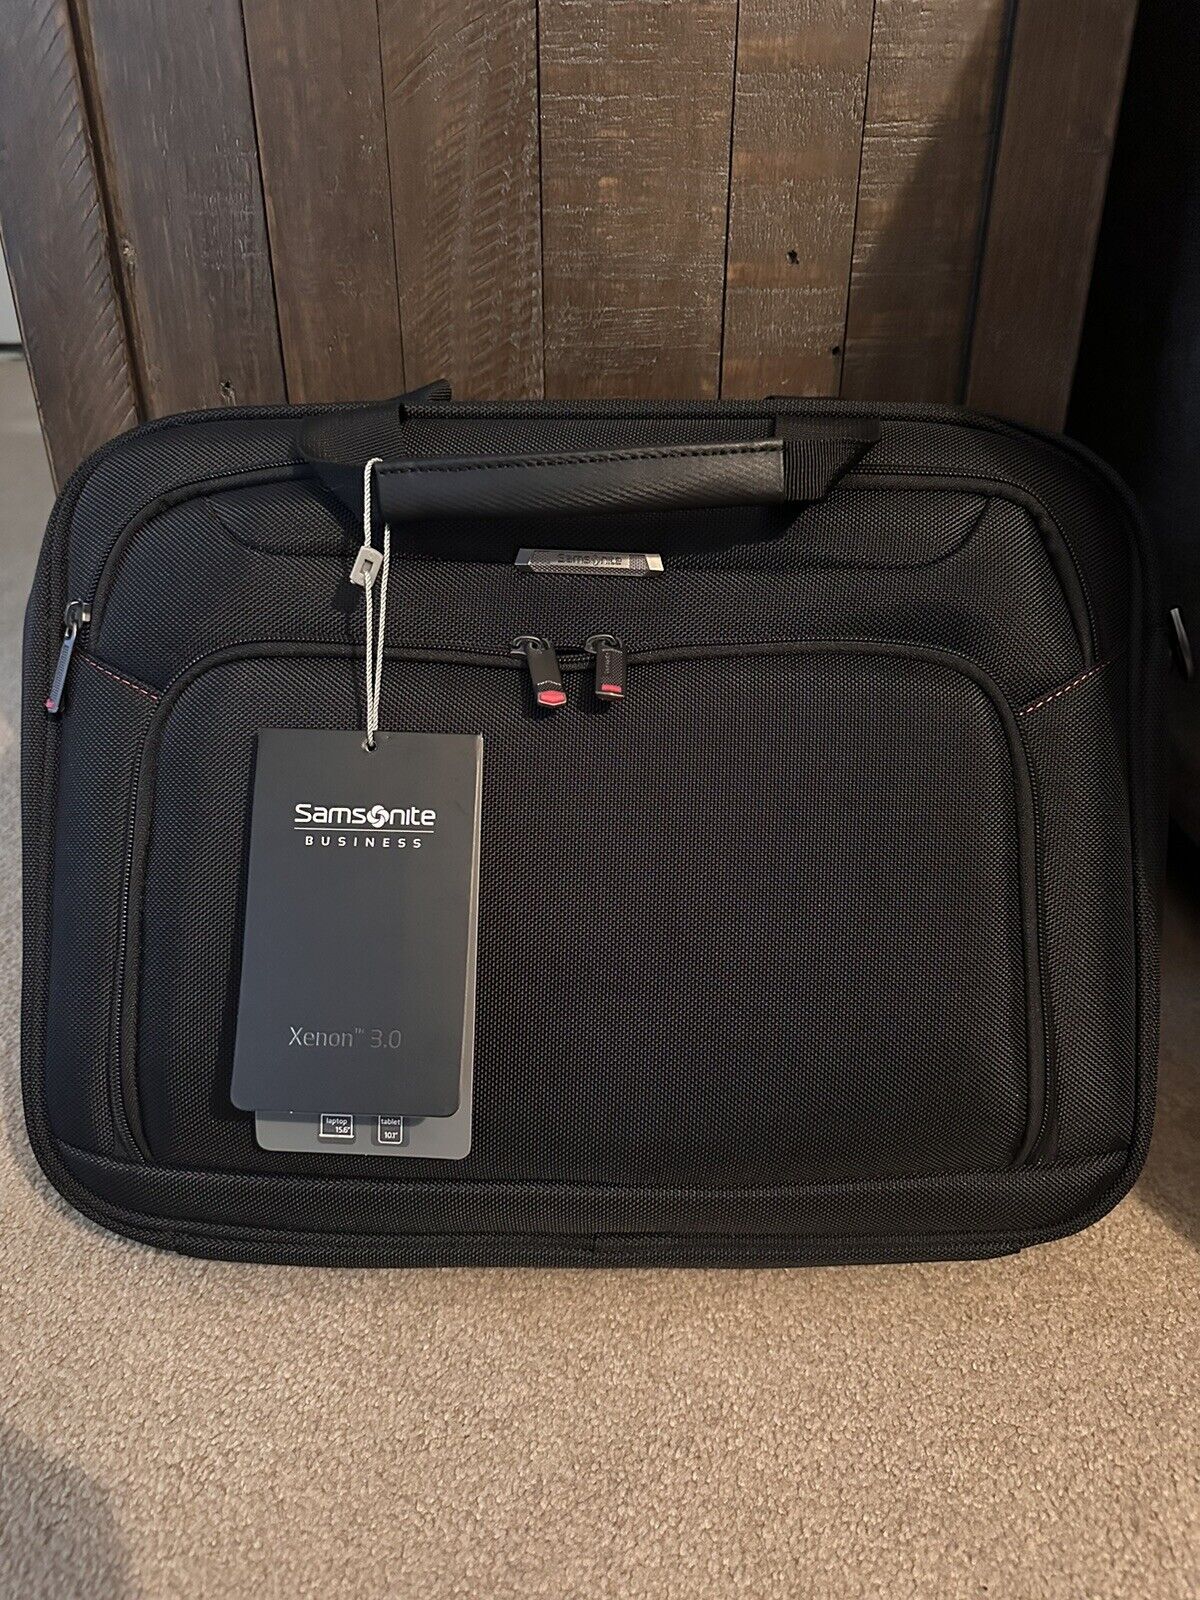 SamsoNite BUSINESS XENON 3.0 TECHLOCKER BRIEFCASE. New. Tags.  Never Used. Great